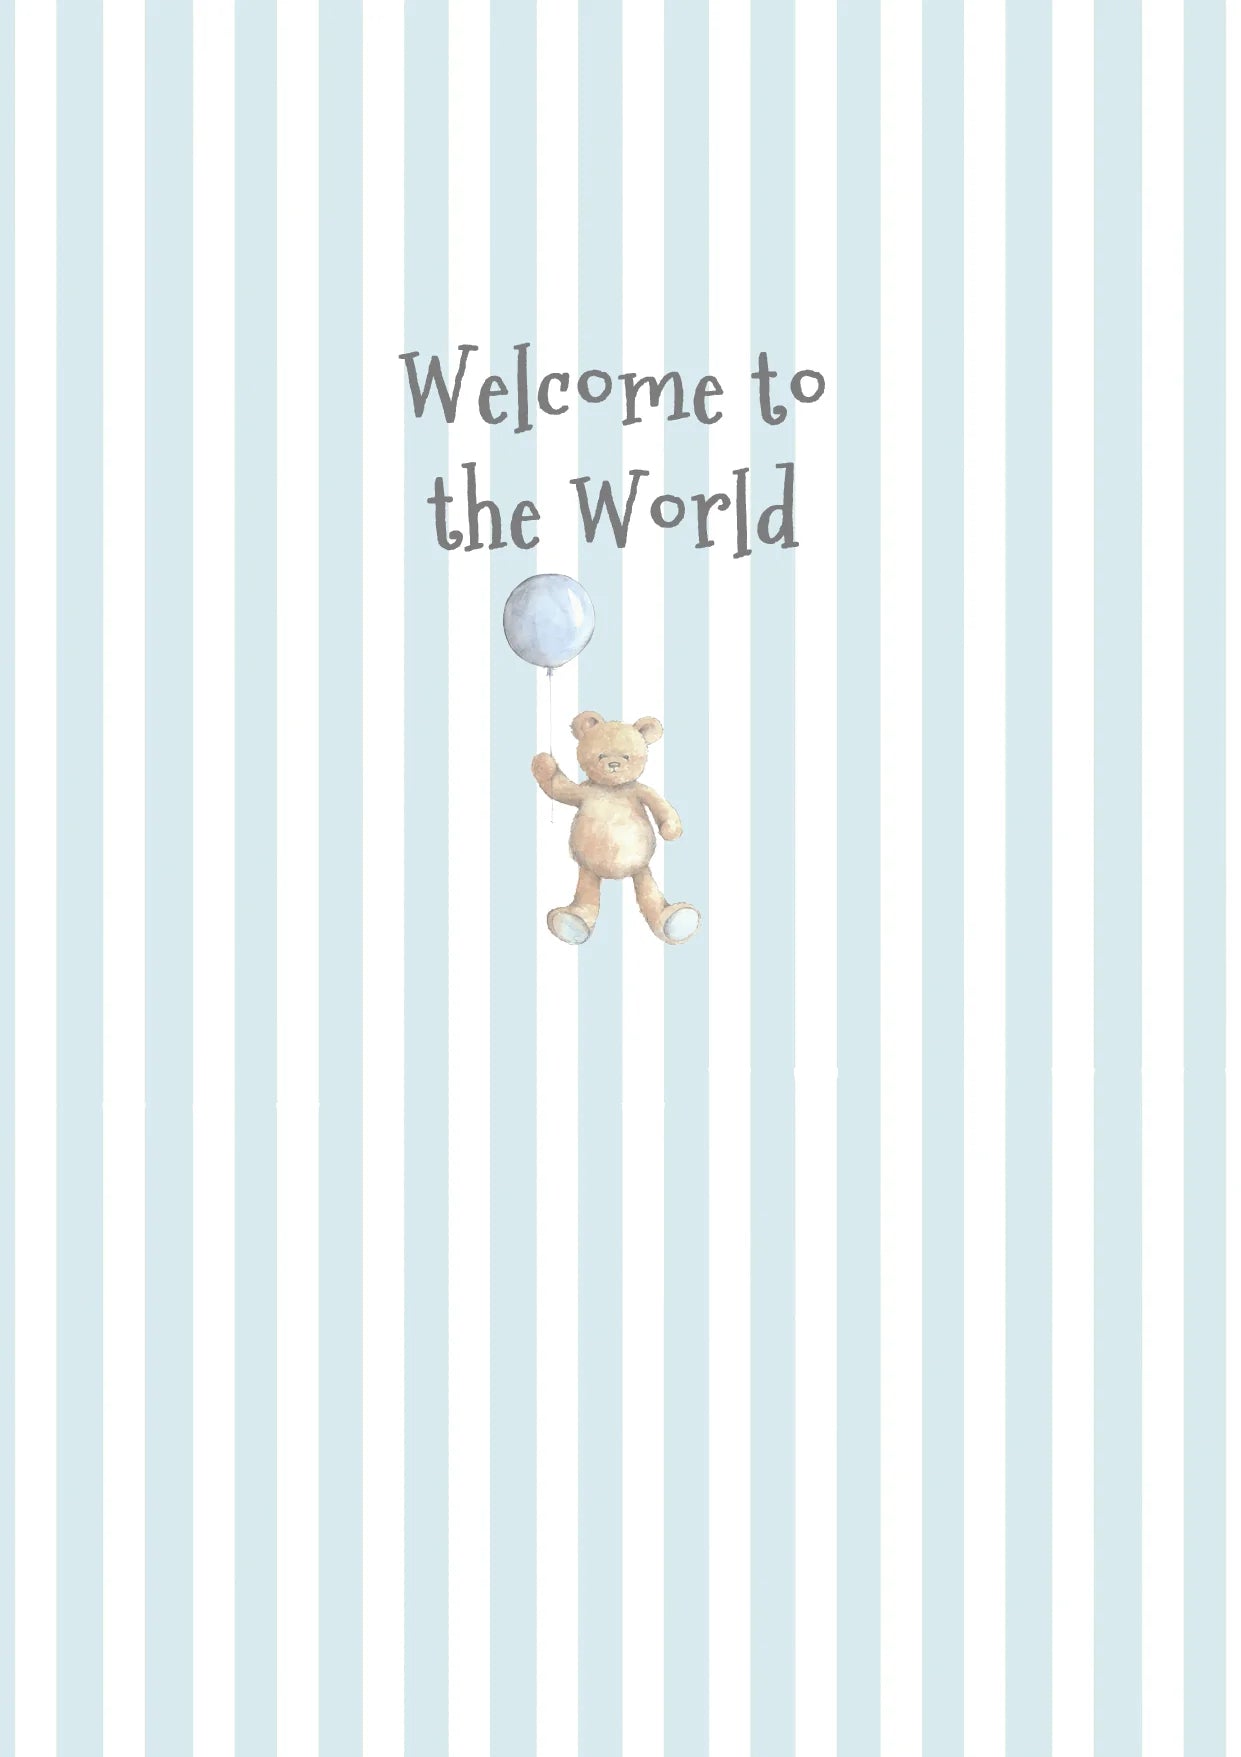 Fabulous Gifts Crumble & Core Keepsake Baby Boy Teddy Card by Weirs of Baggot Street